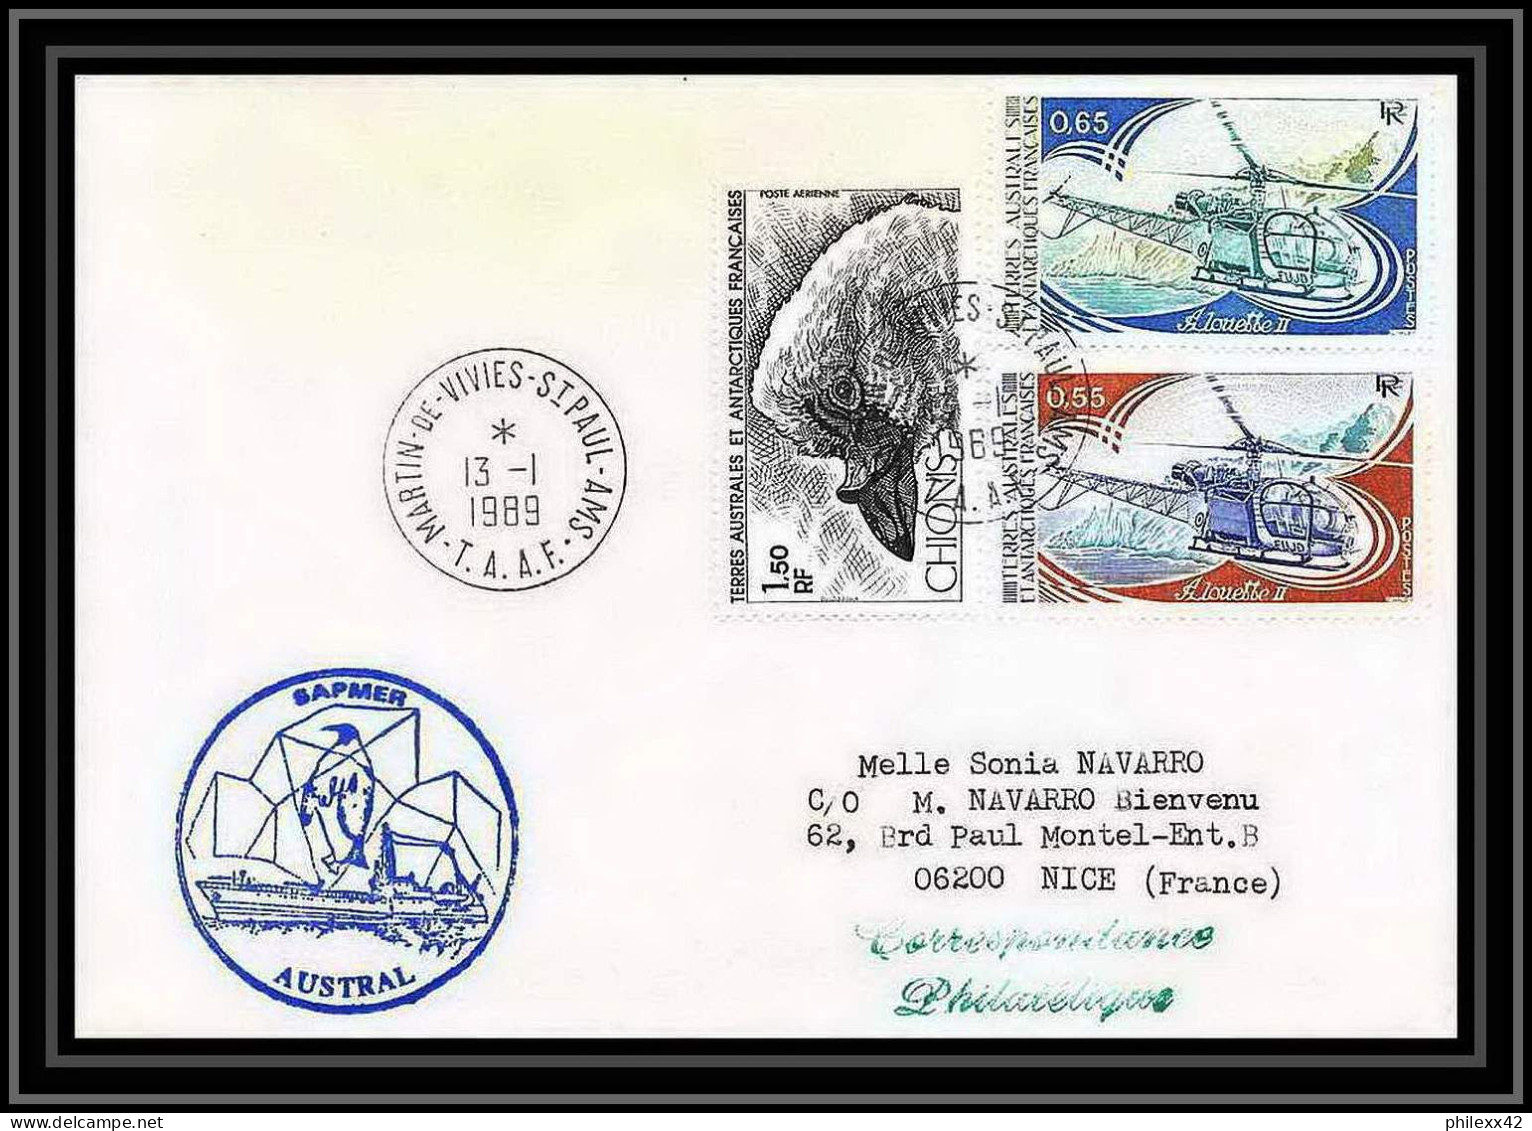 1639 Samper Austral 13/1/1989 TAAF Antarctic Terres Australes Lettre (cover) - Covers & Documents